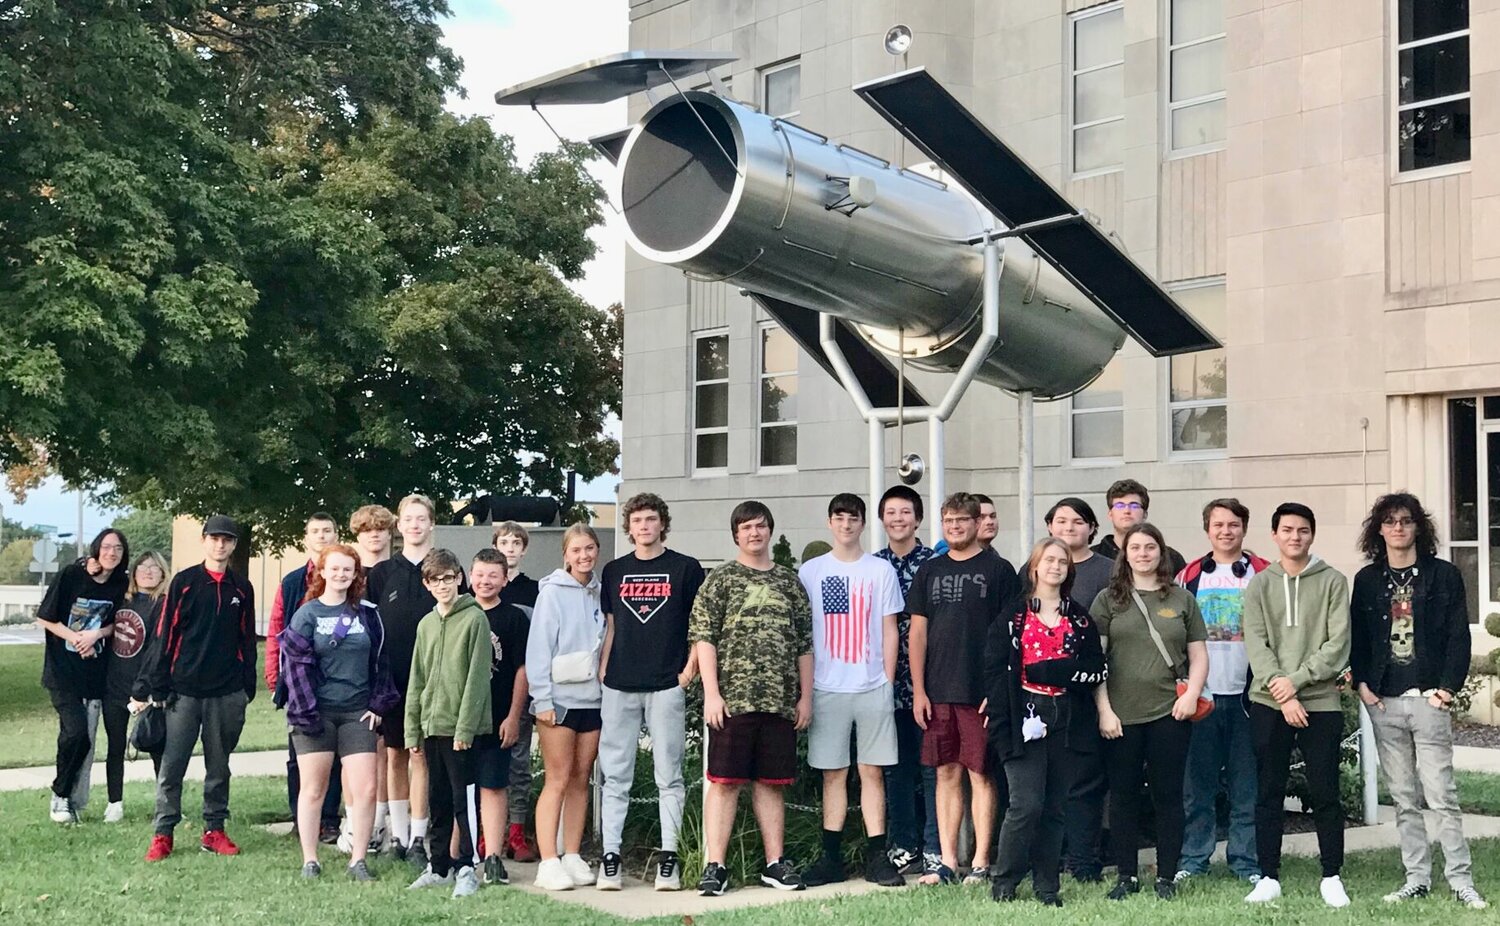 Natalie Brazeal's West Plains High School earth science, physics, Project Lead the Way and engineering classes are working with the City of West Plains to make plans for the 2024 Eclipse, sparking astronomy interest. Students are leading projects like documentaries and podcasts and recently visited Missouri State University’s Baker Observatory just north of Marshfield.